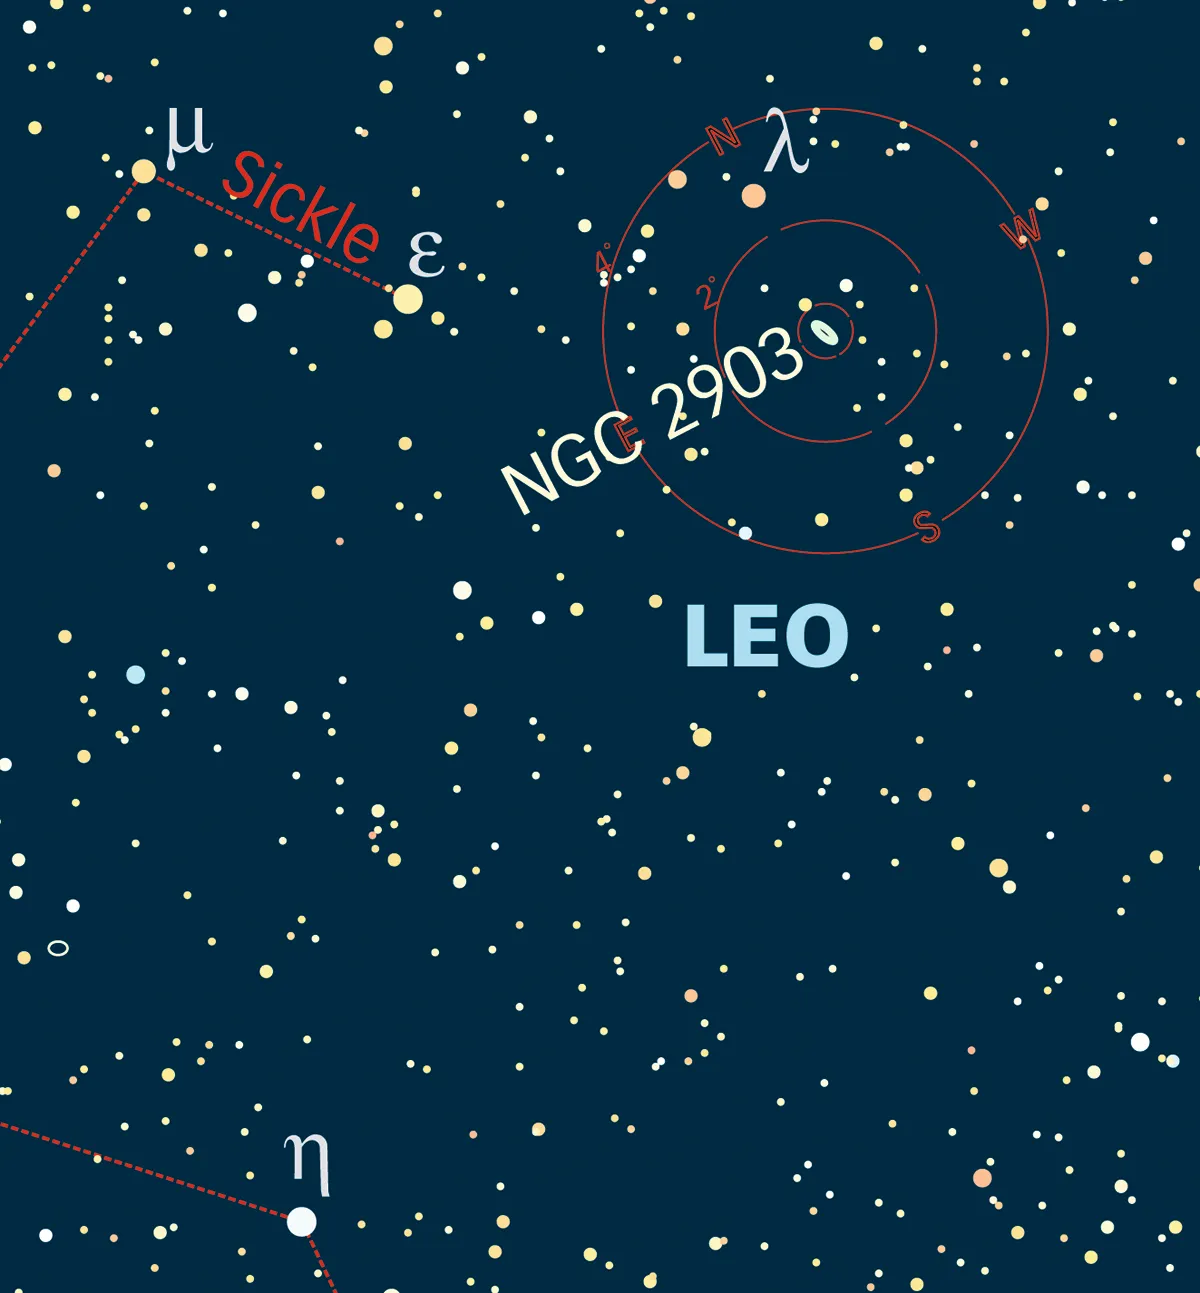 Chart showing the location of galaxy NGC 2903